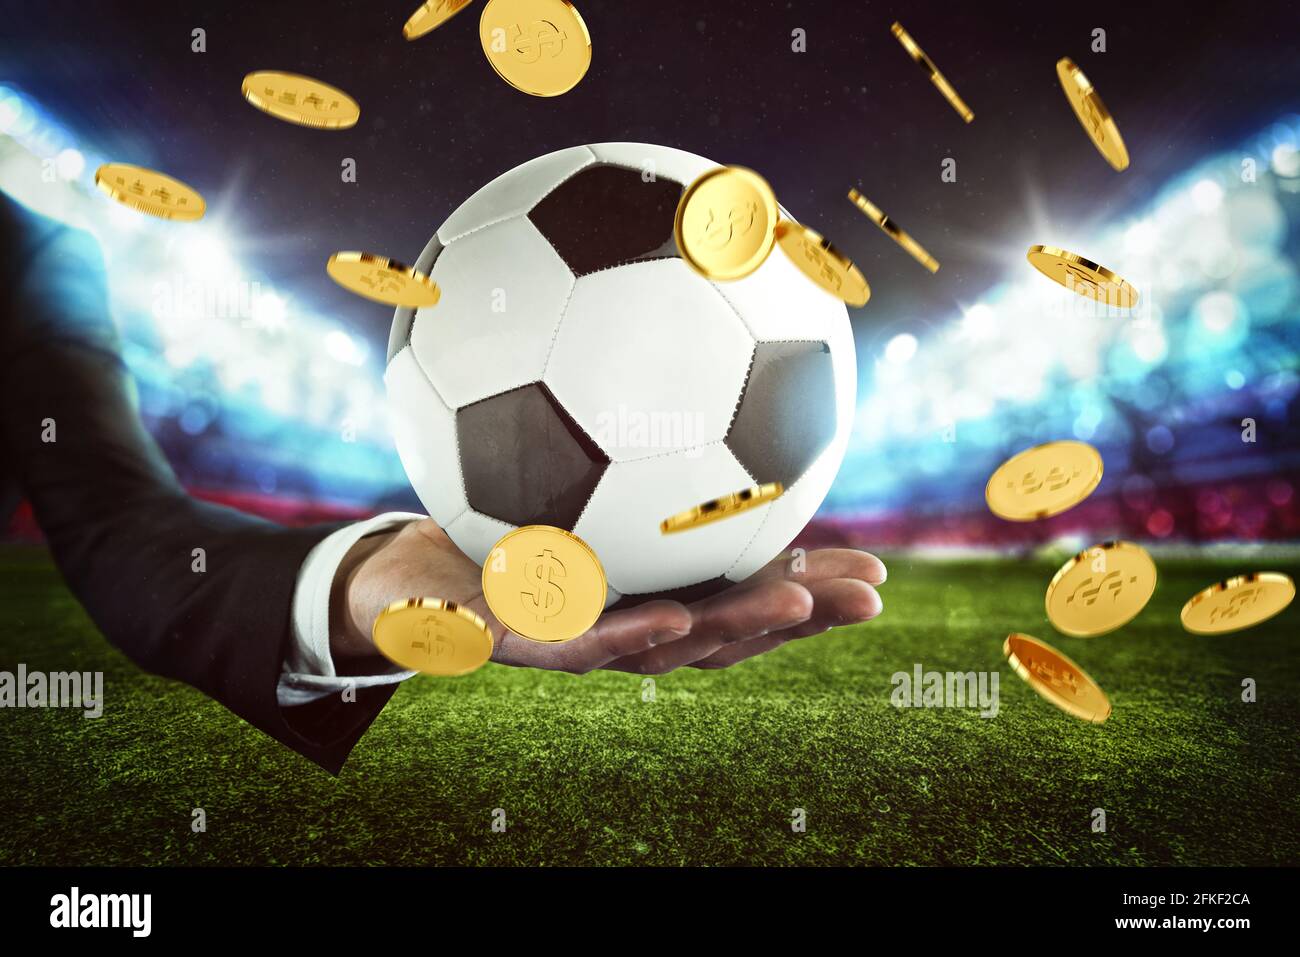 Football Bets High Resolution Stock Photography and Images - Alamy